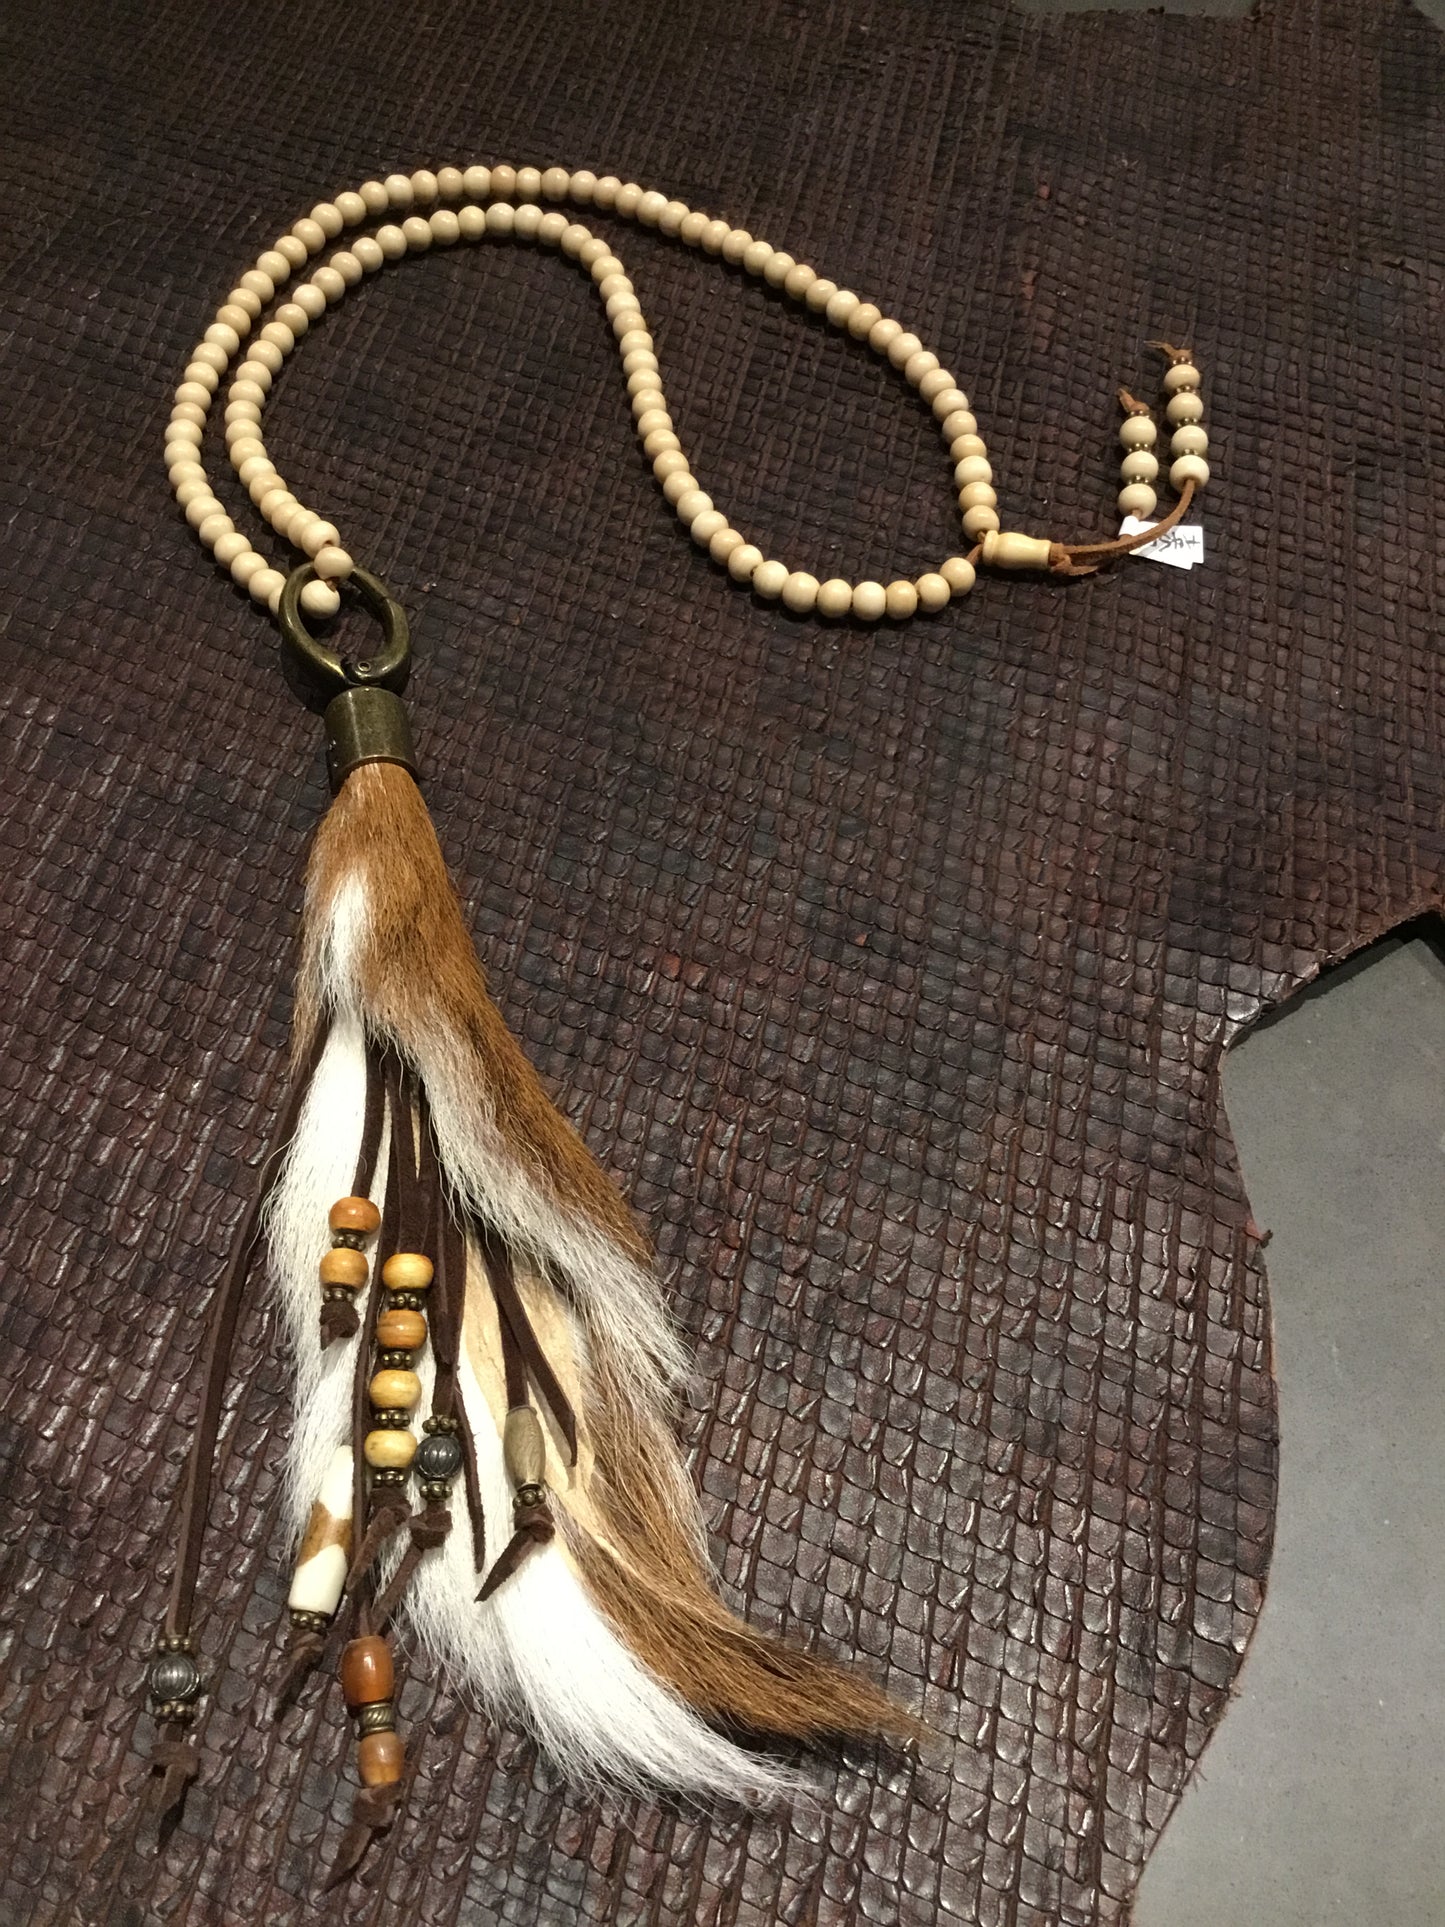 Strand of Bone Beads with Axis Deer Hide Necklace - Amy Kaplan for Bourbon Cowgirl